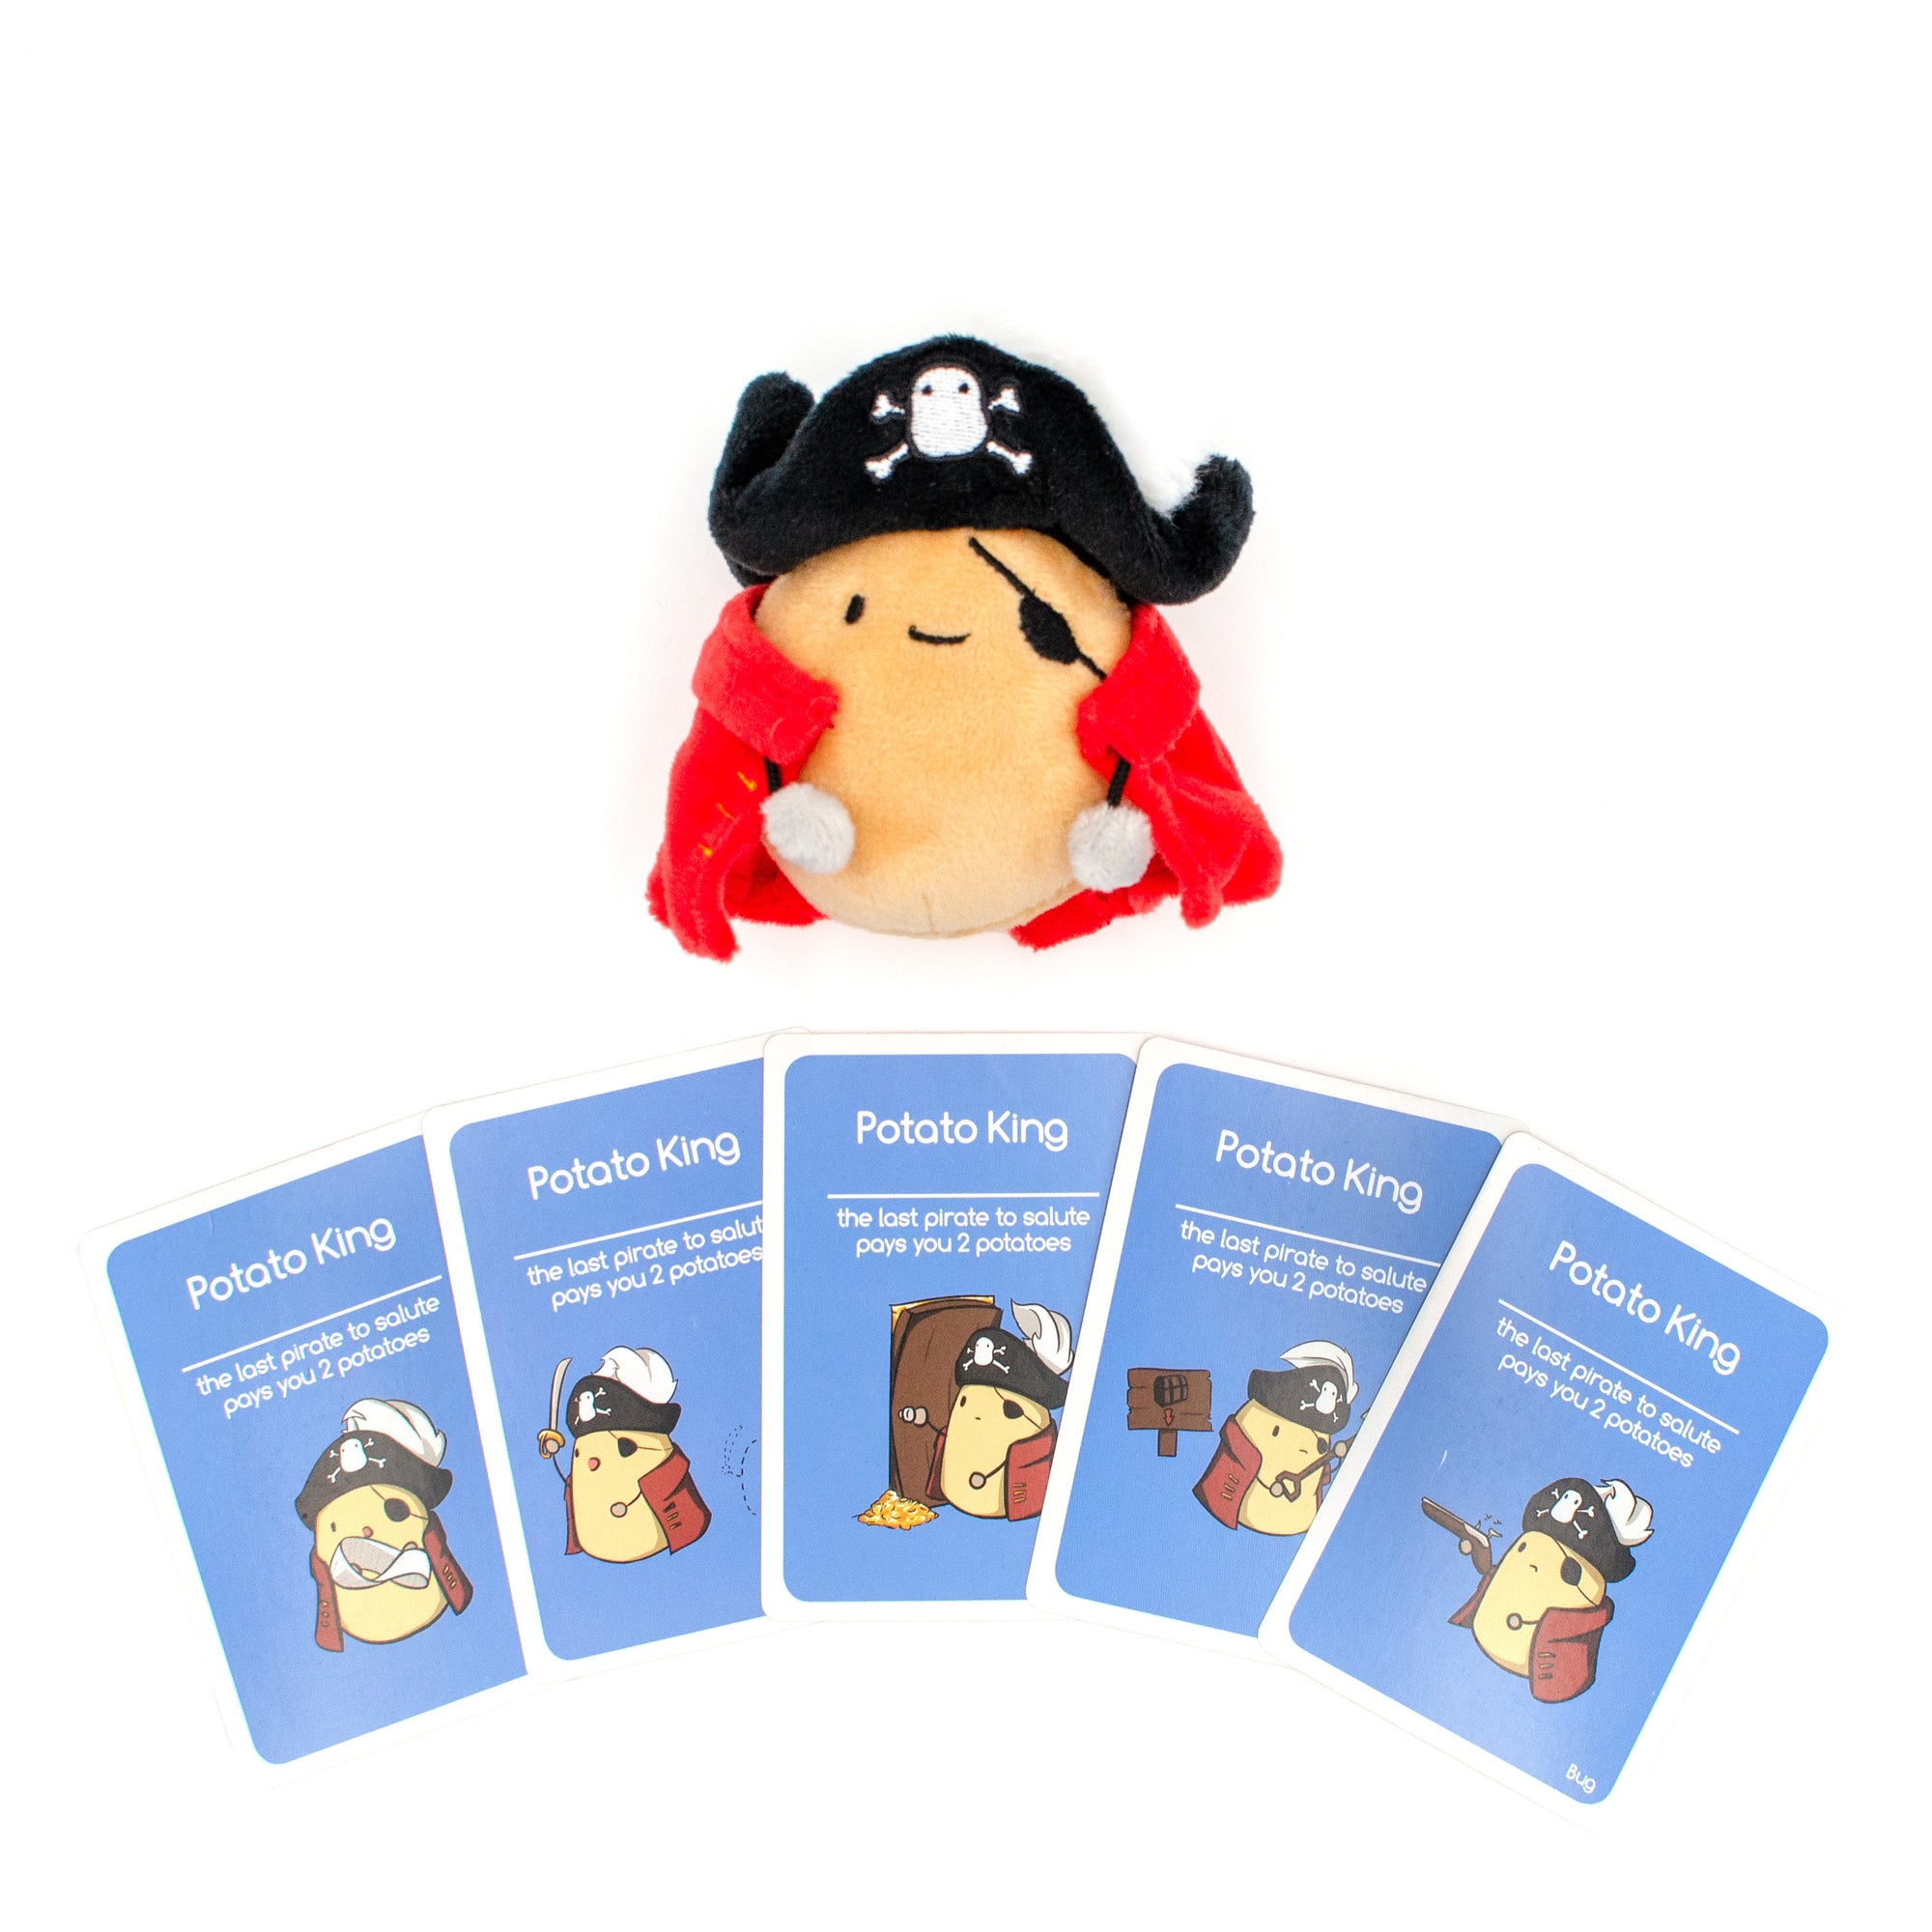 Potato King Plushie Keychain with cards from Potato Pirates card game